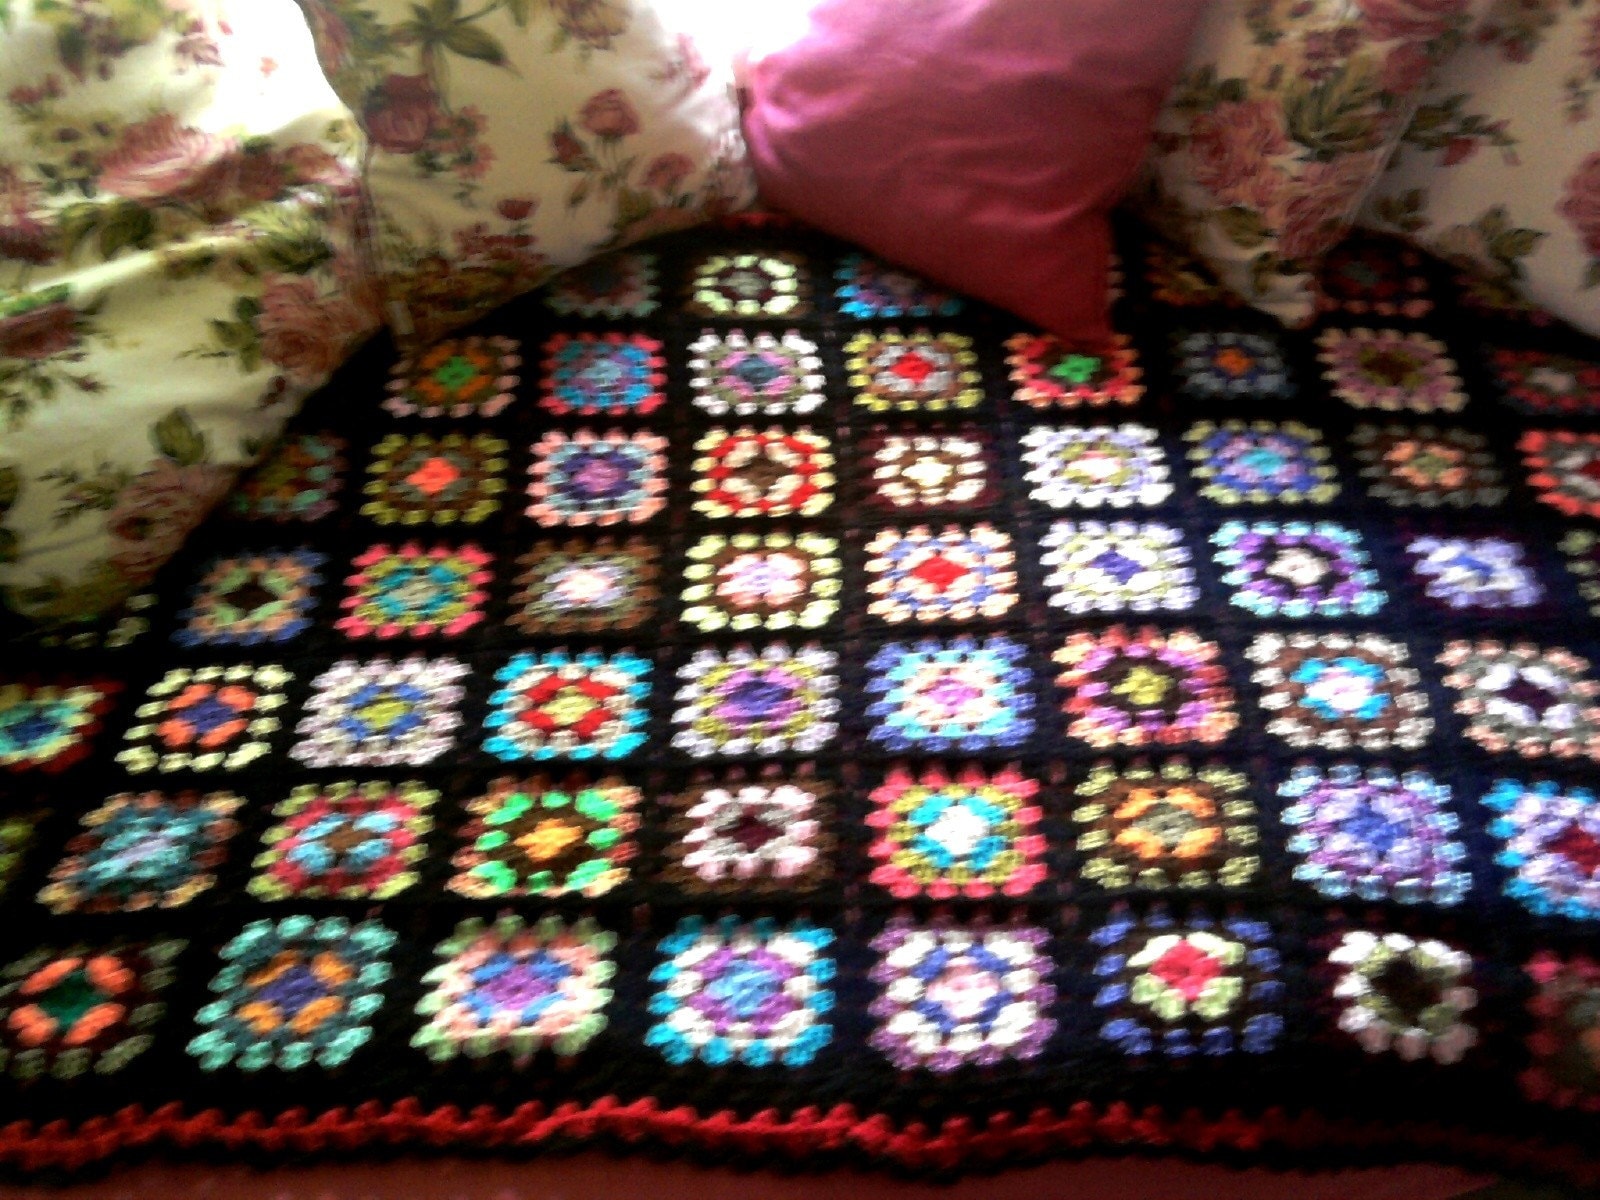 Free Crochet Patterns - My Crochet Site - FREE afghan and square